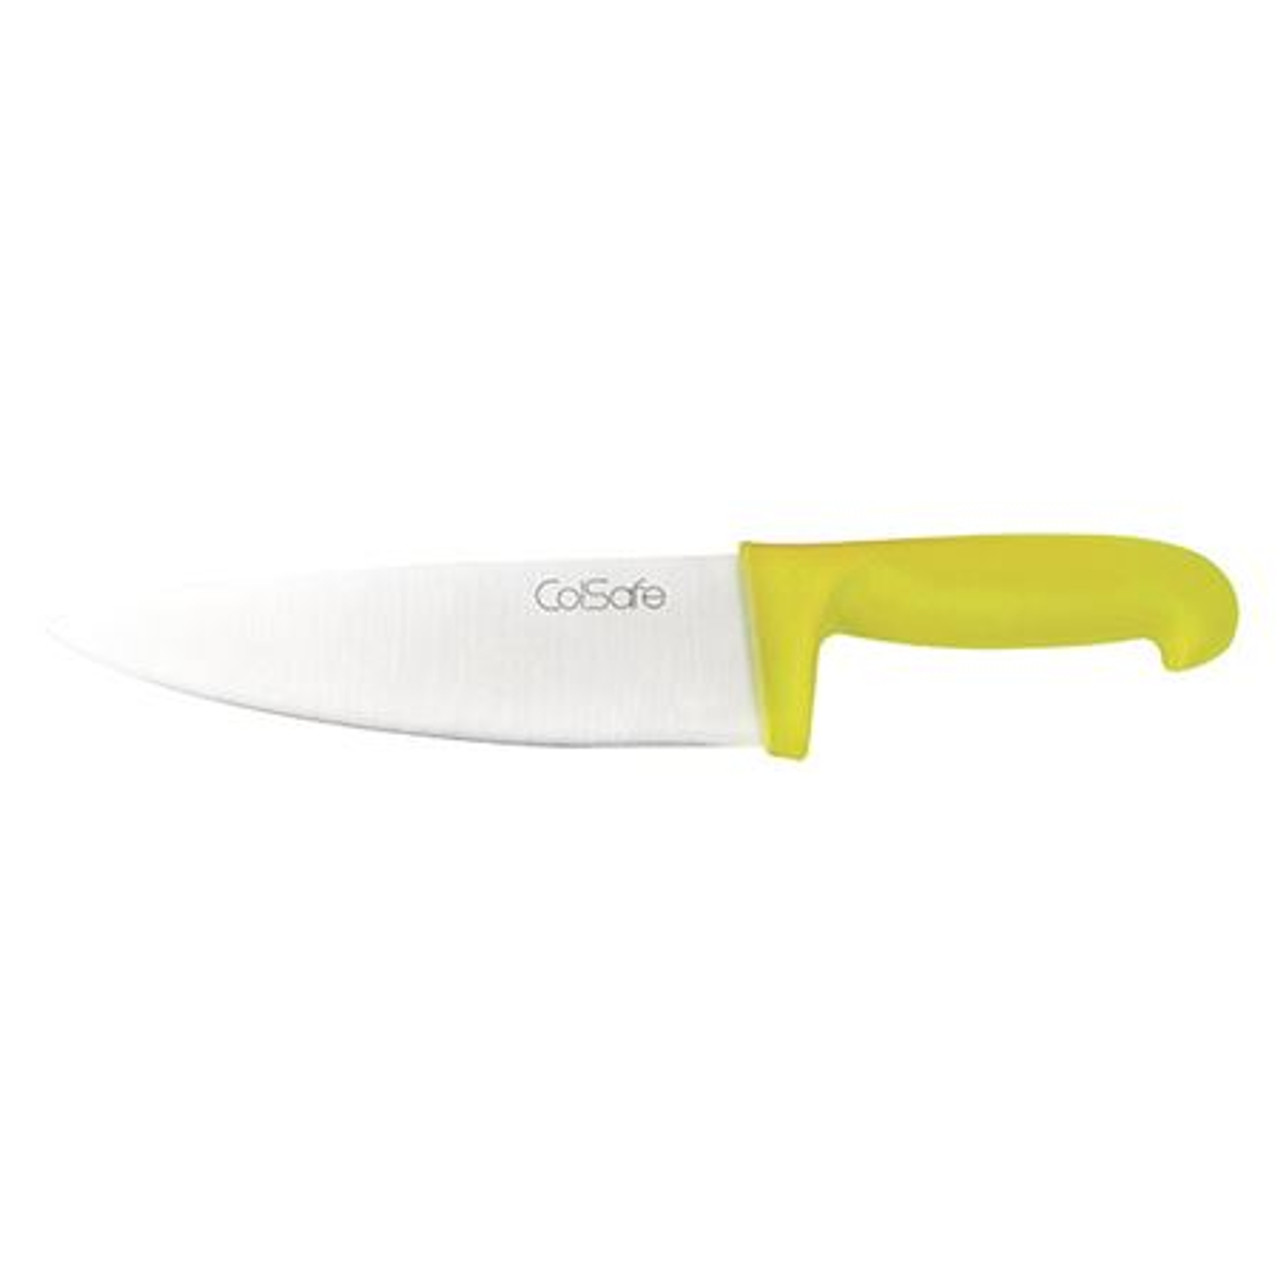 Colsafe Cooks Knife Yellow 8.5"